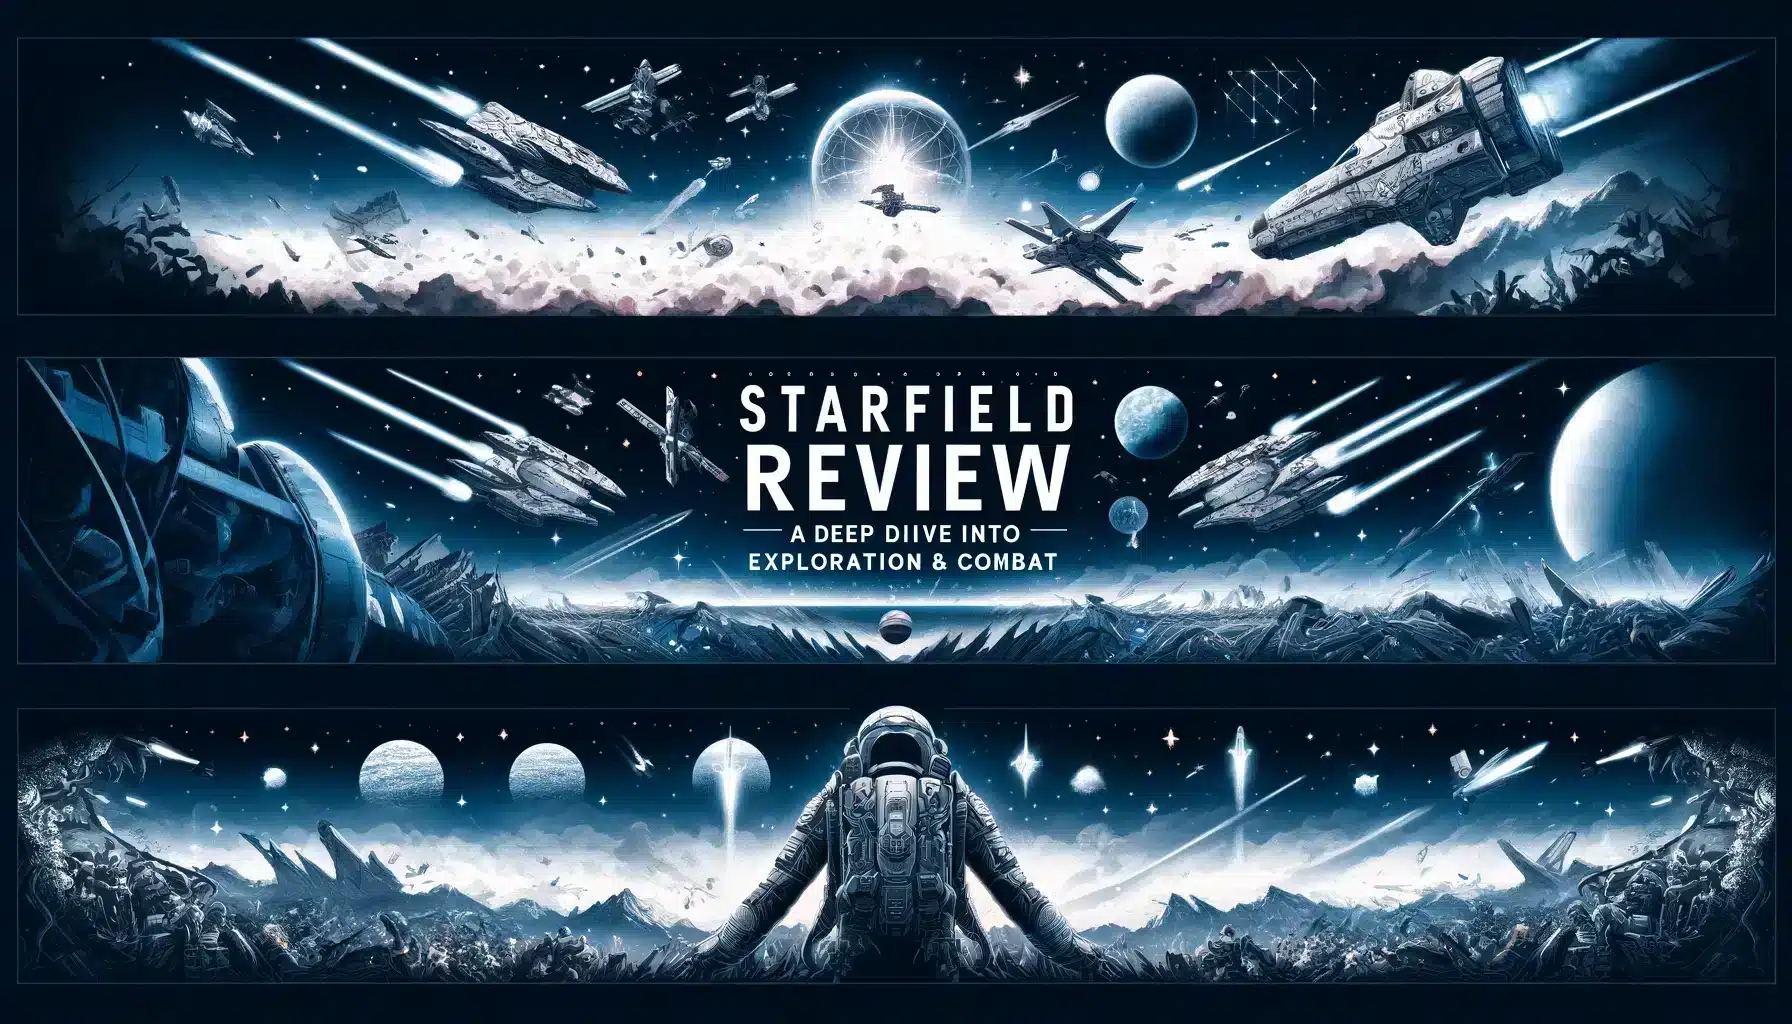 Does Starfield live up to Bethesda’s Legacy